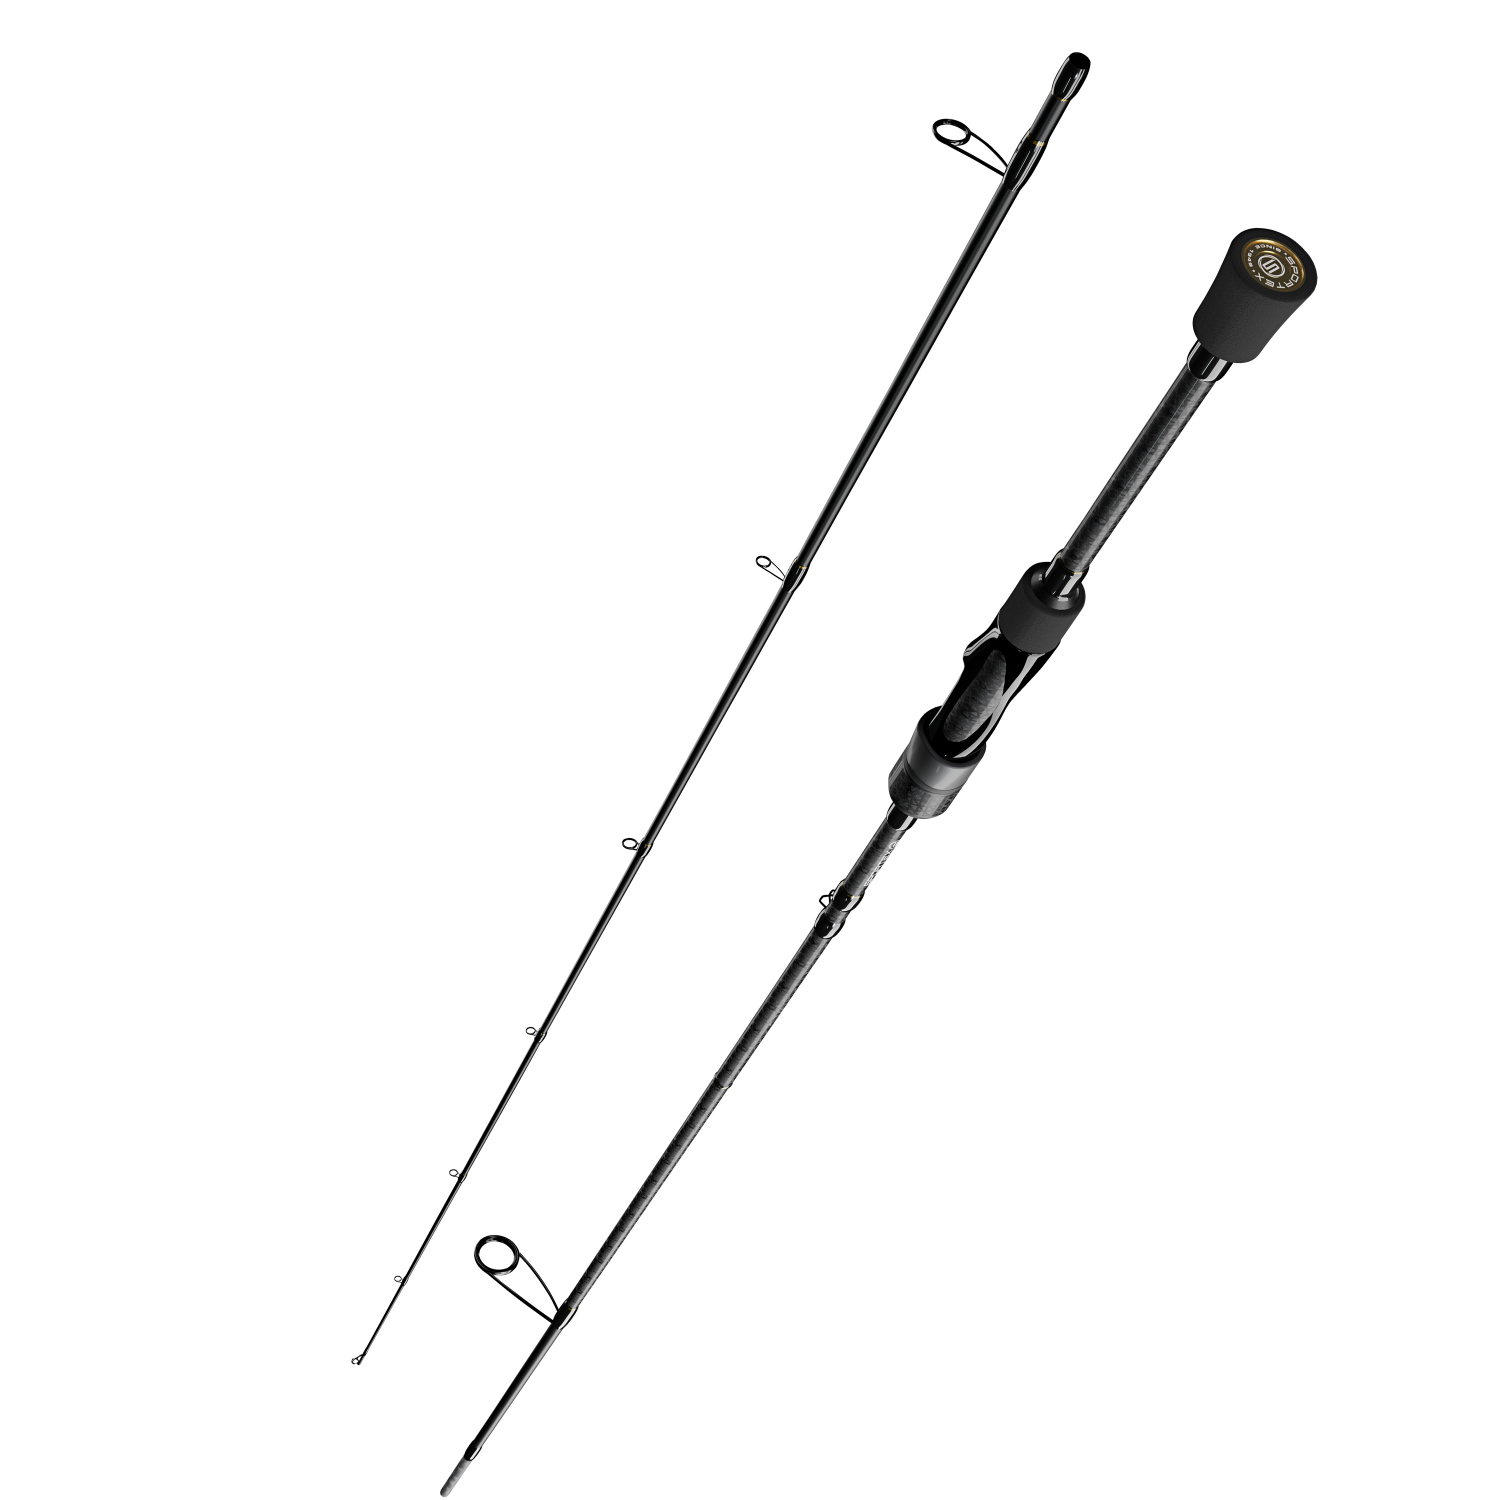 Sportex Spinning rod Rival Bass at low prices